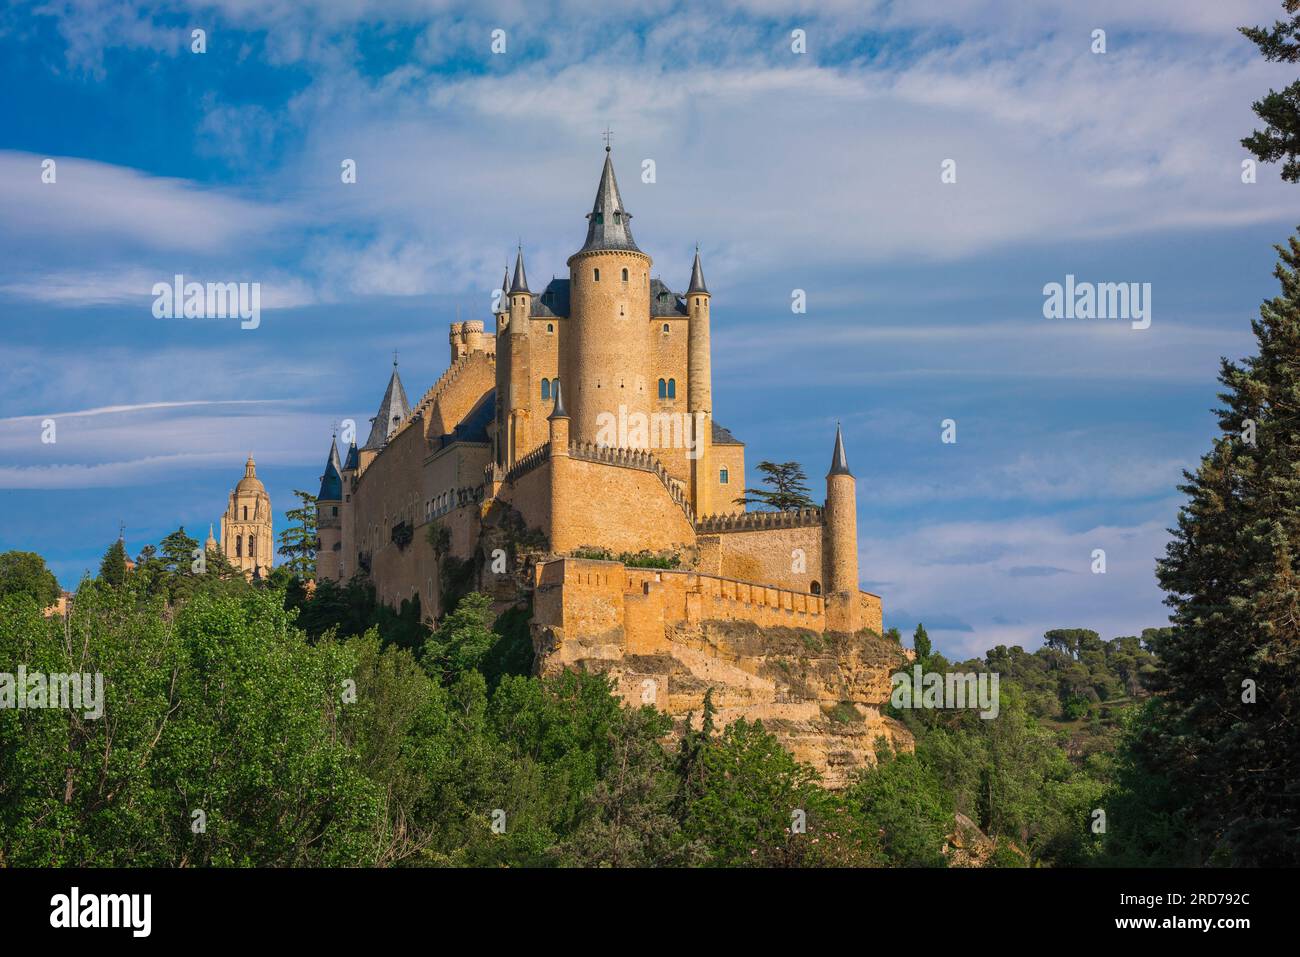 Alcazar Segovia, view of the Alcazar de Segovia, a spectacular castle dating from C15th and sited on the north-west edge of the city of Segovia, Spain Stock Photo